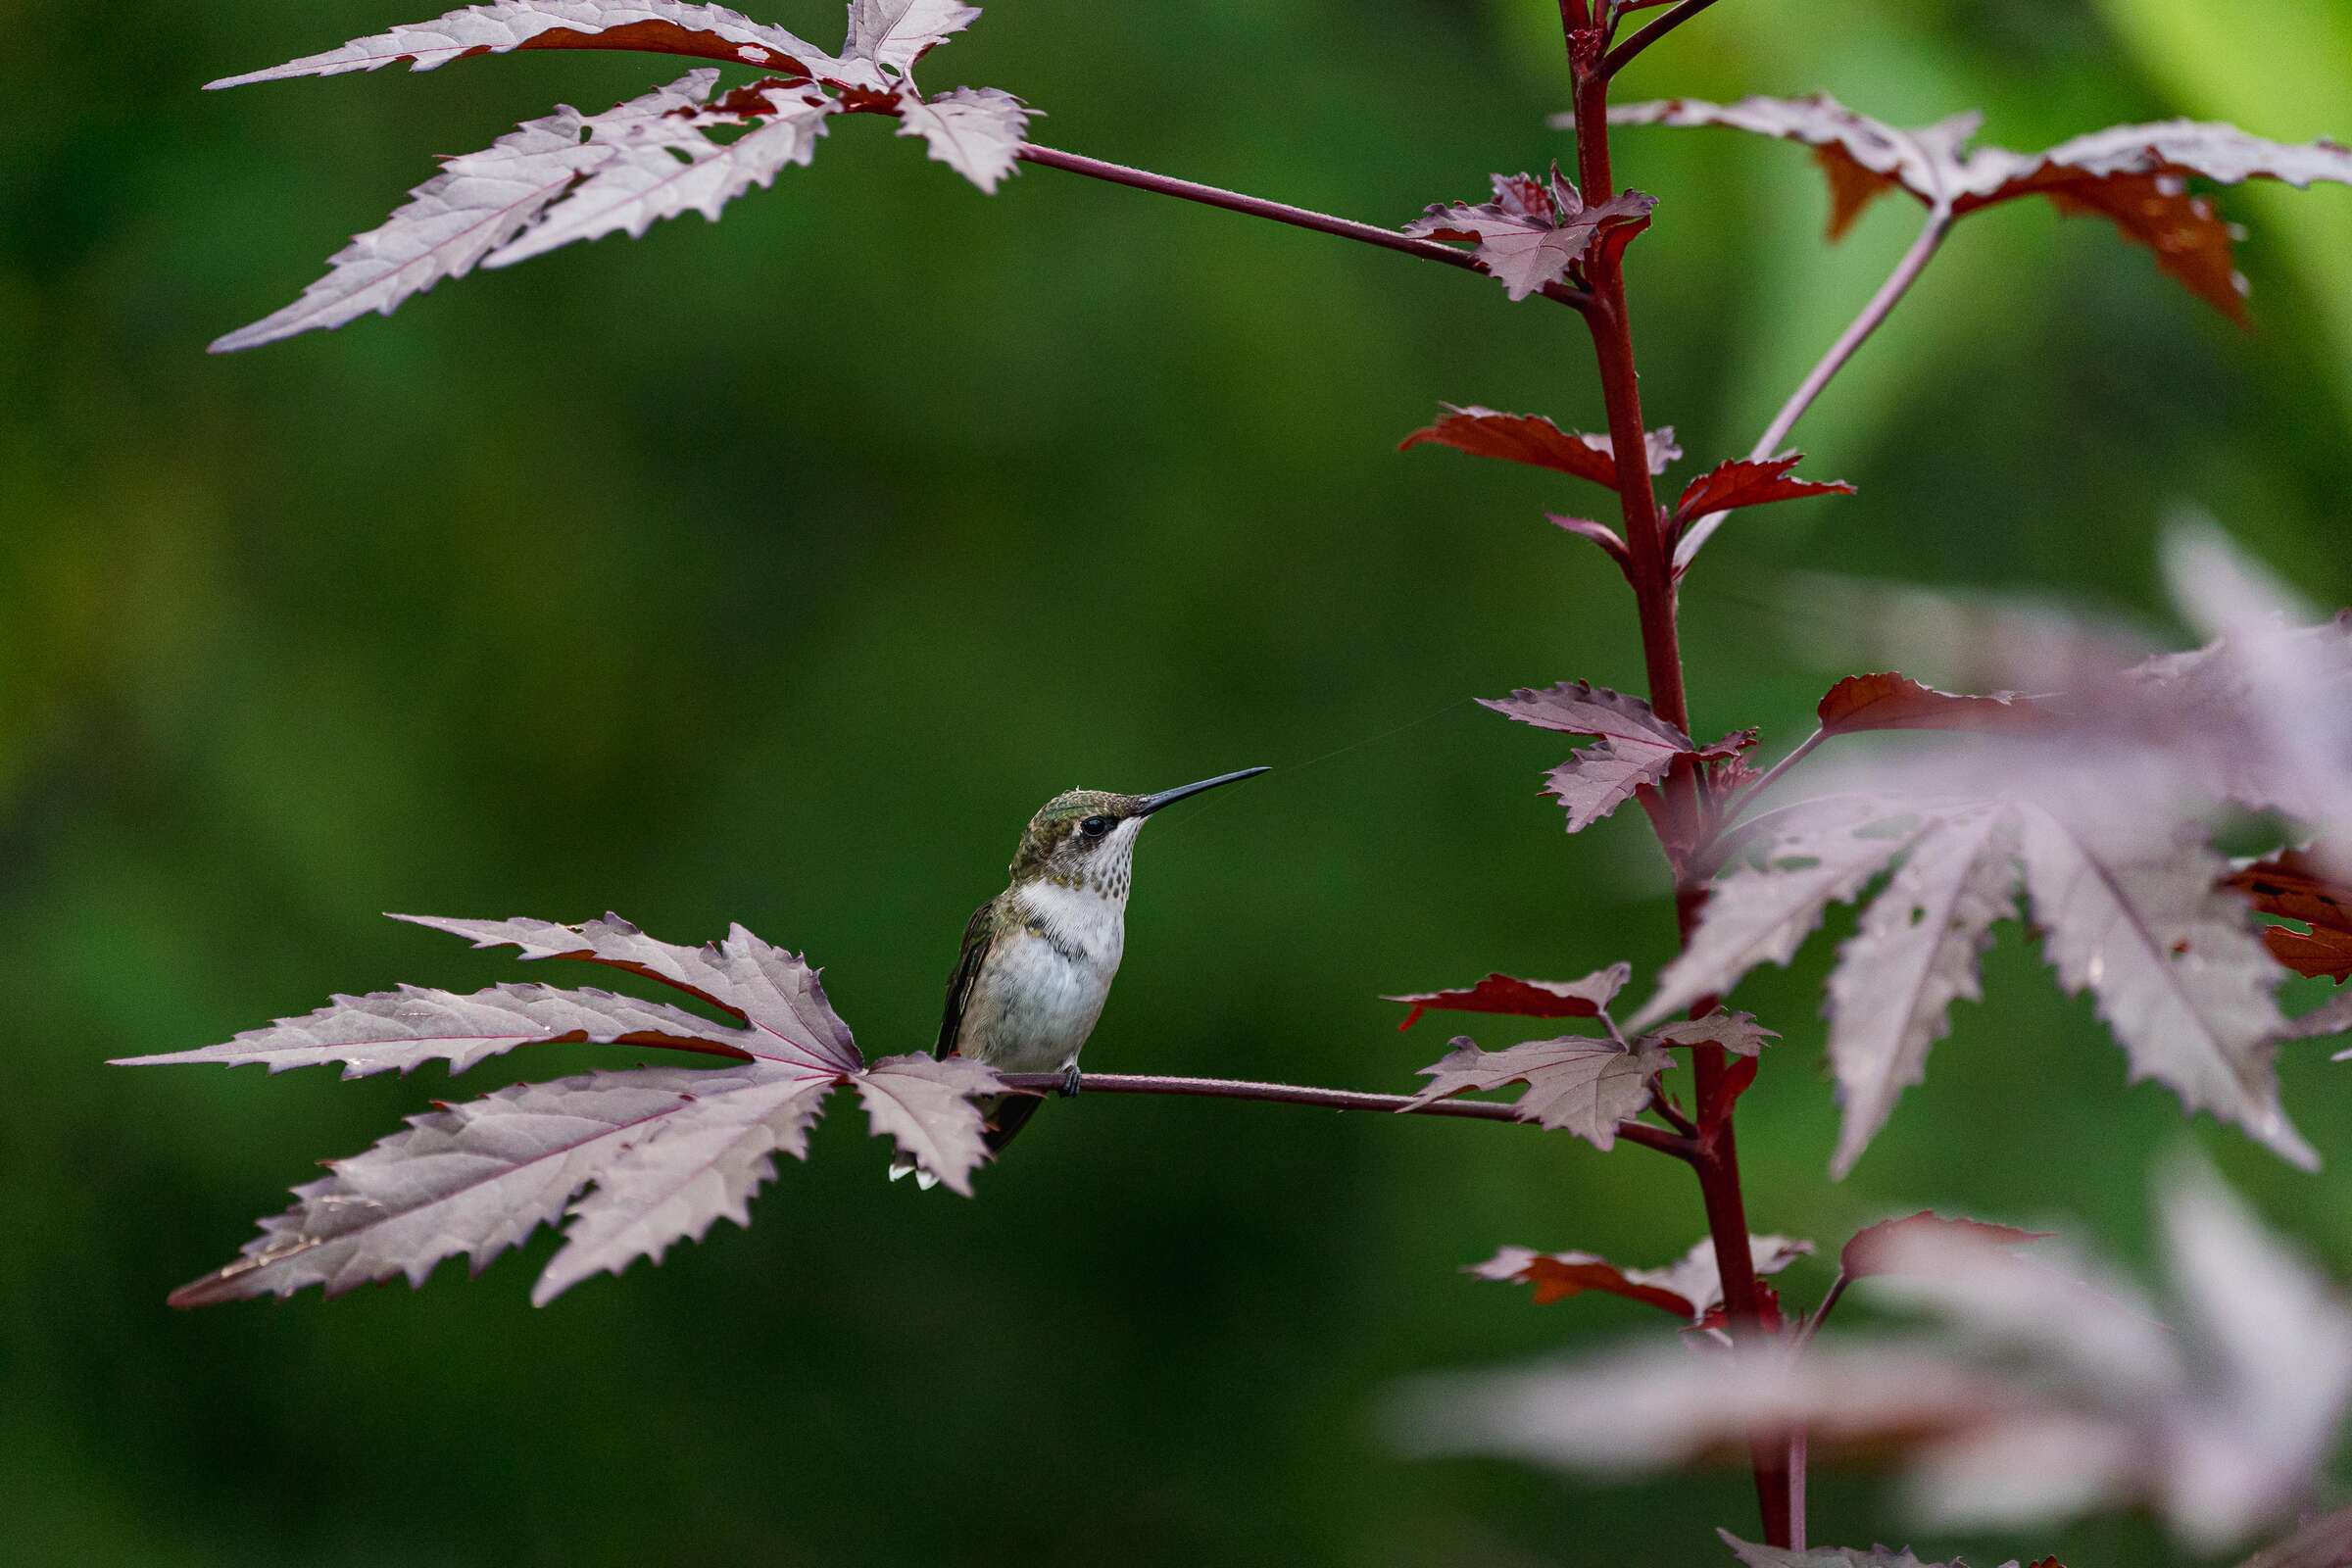 A small hummingbird sits on a branch, surrounded by deep red maple leaves